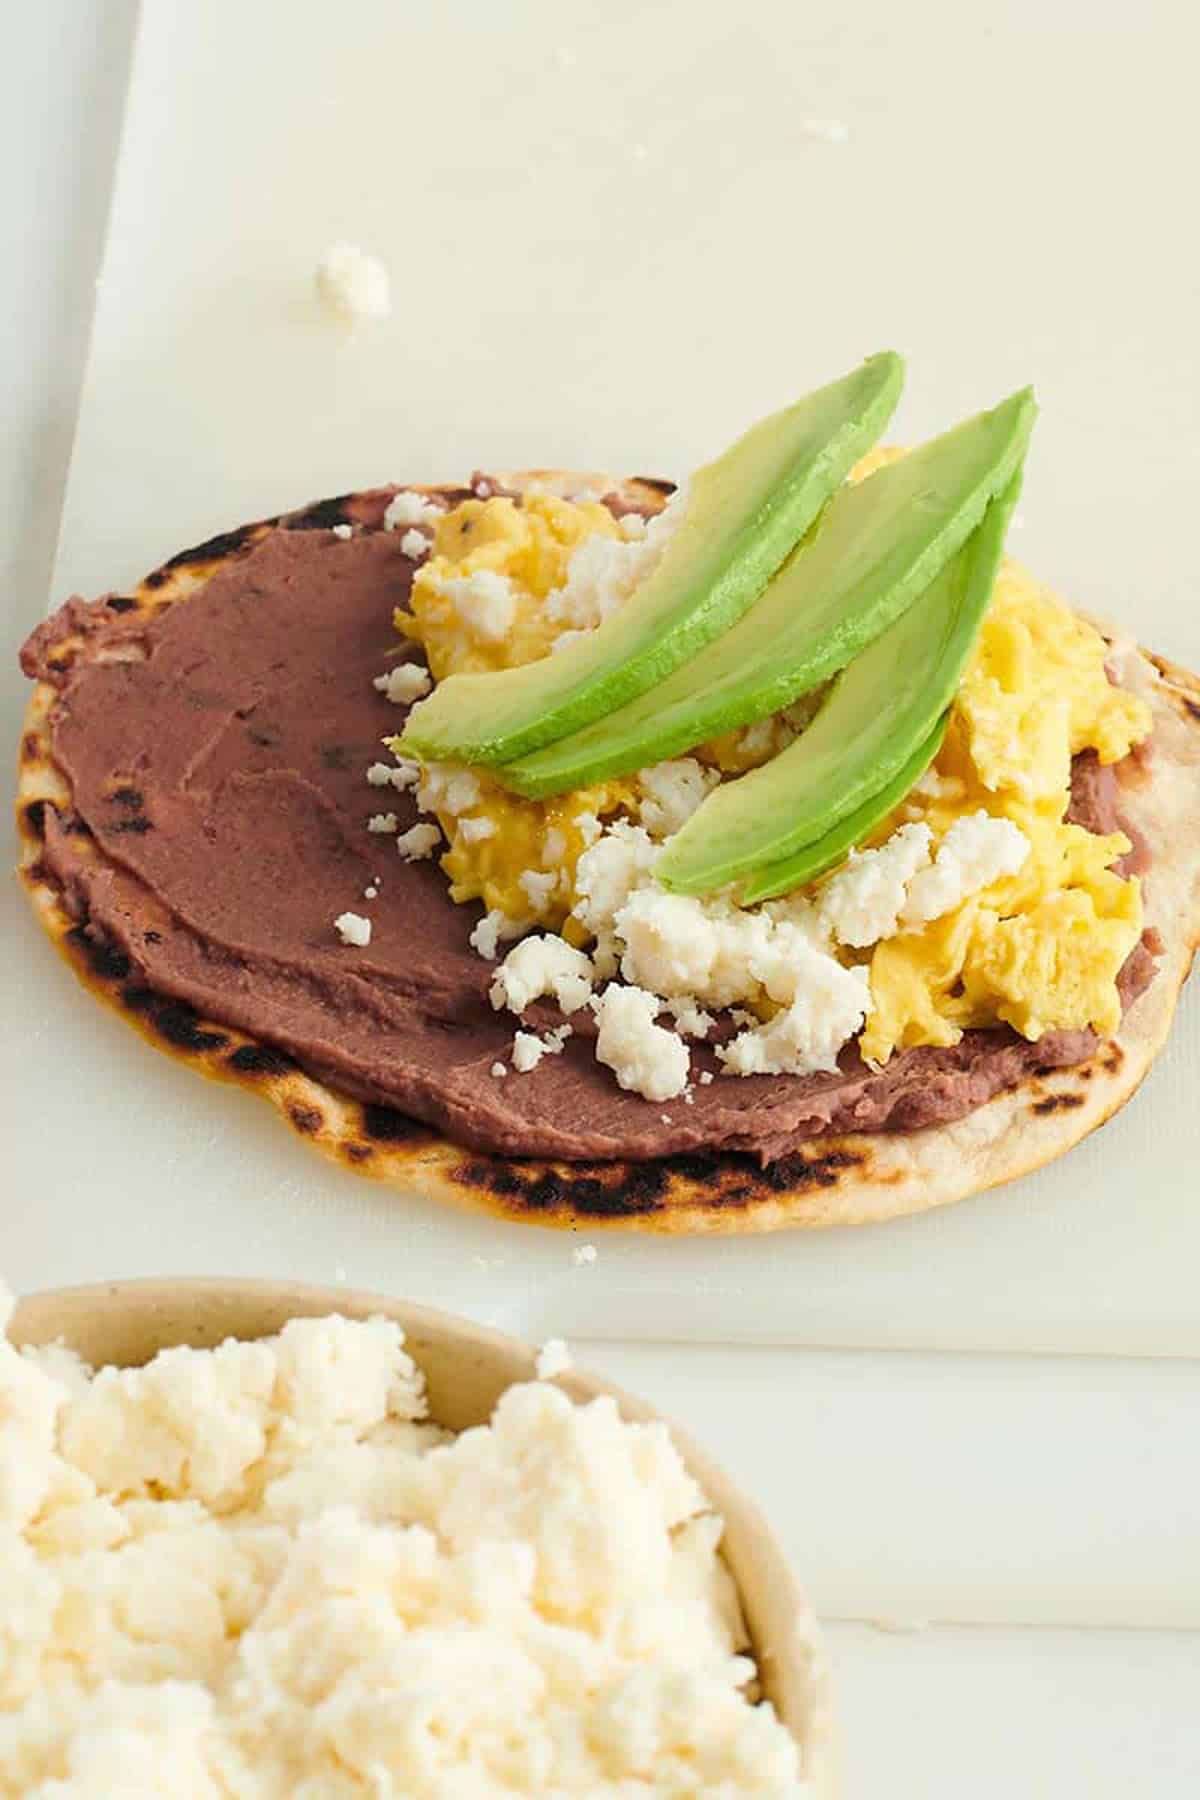 Baleadas with flour tortilla topped with refried beans, queso fresco, and avocado slices.